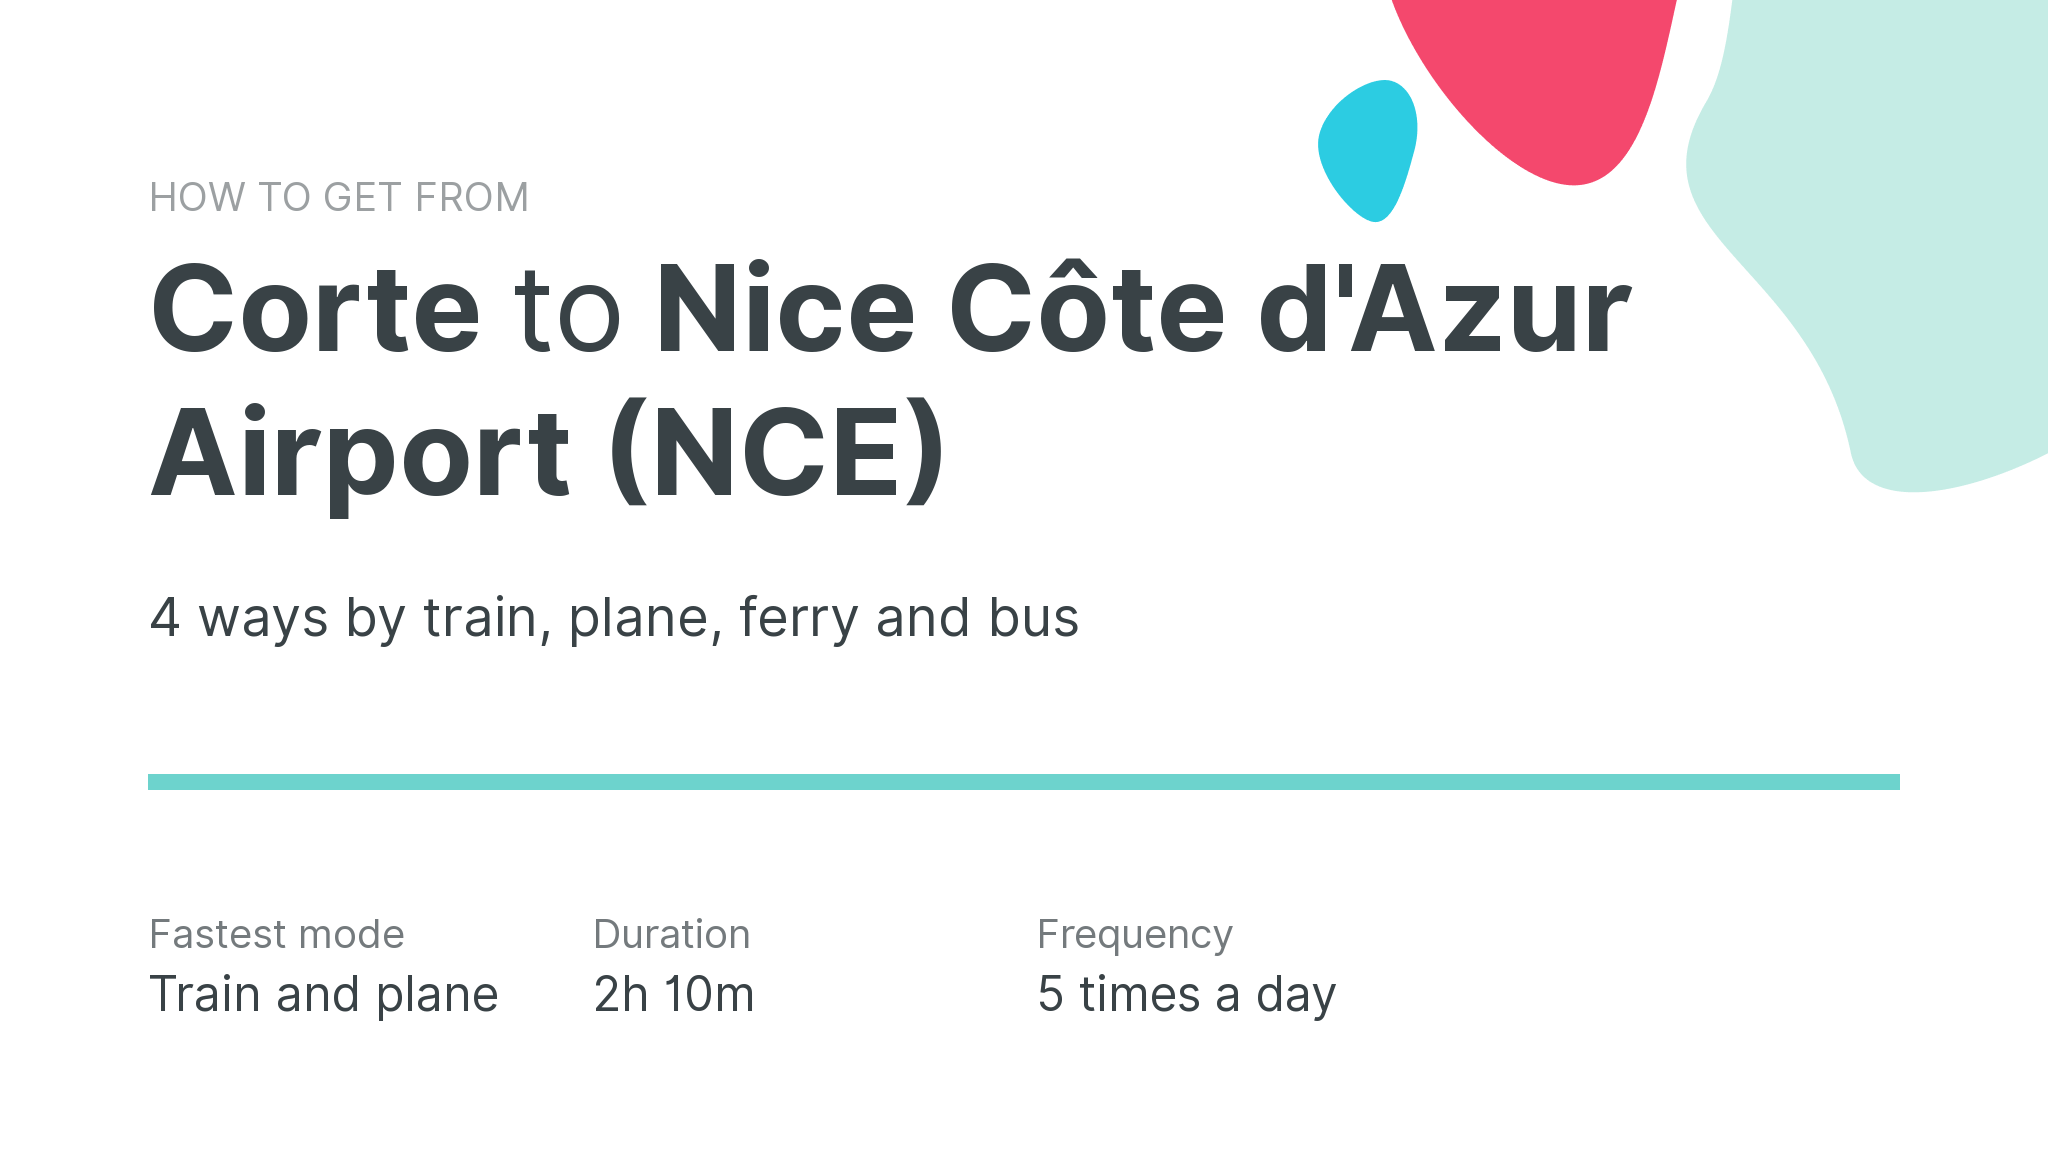 How do I get from Corte to Nice Côte d'Azur Airport (NCE)